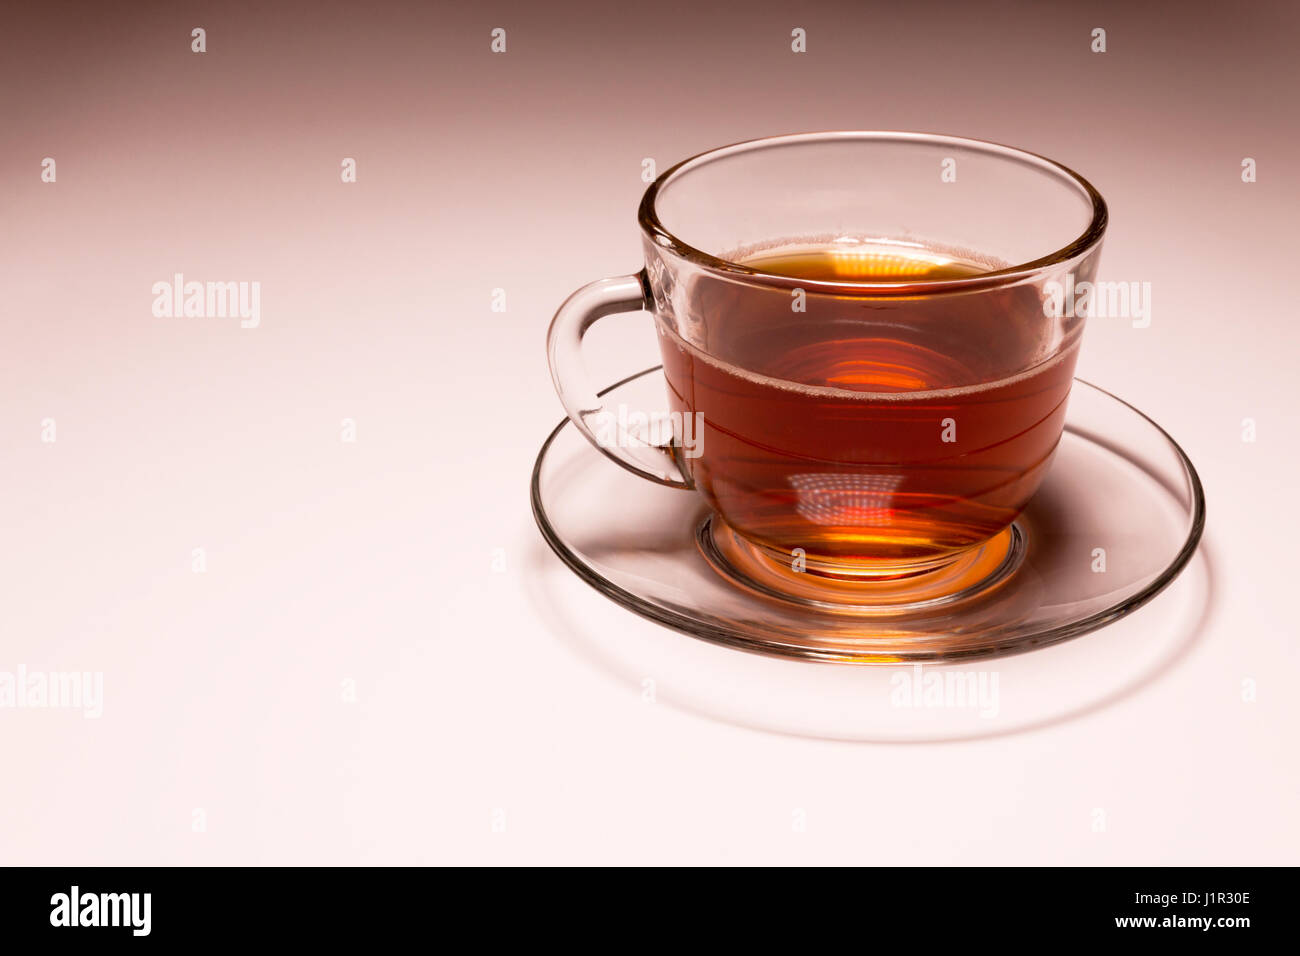 transparent glass cup with tea on a glass saucer Stock Photo